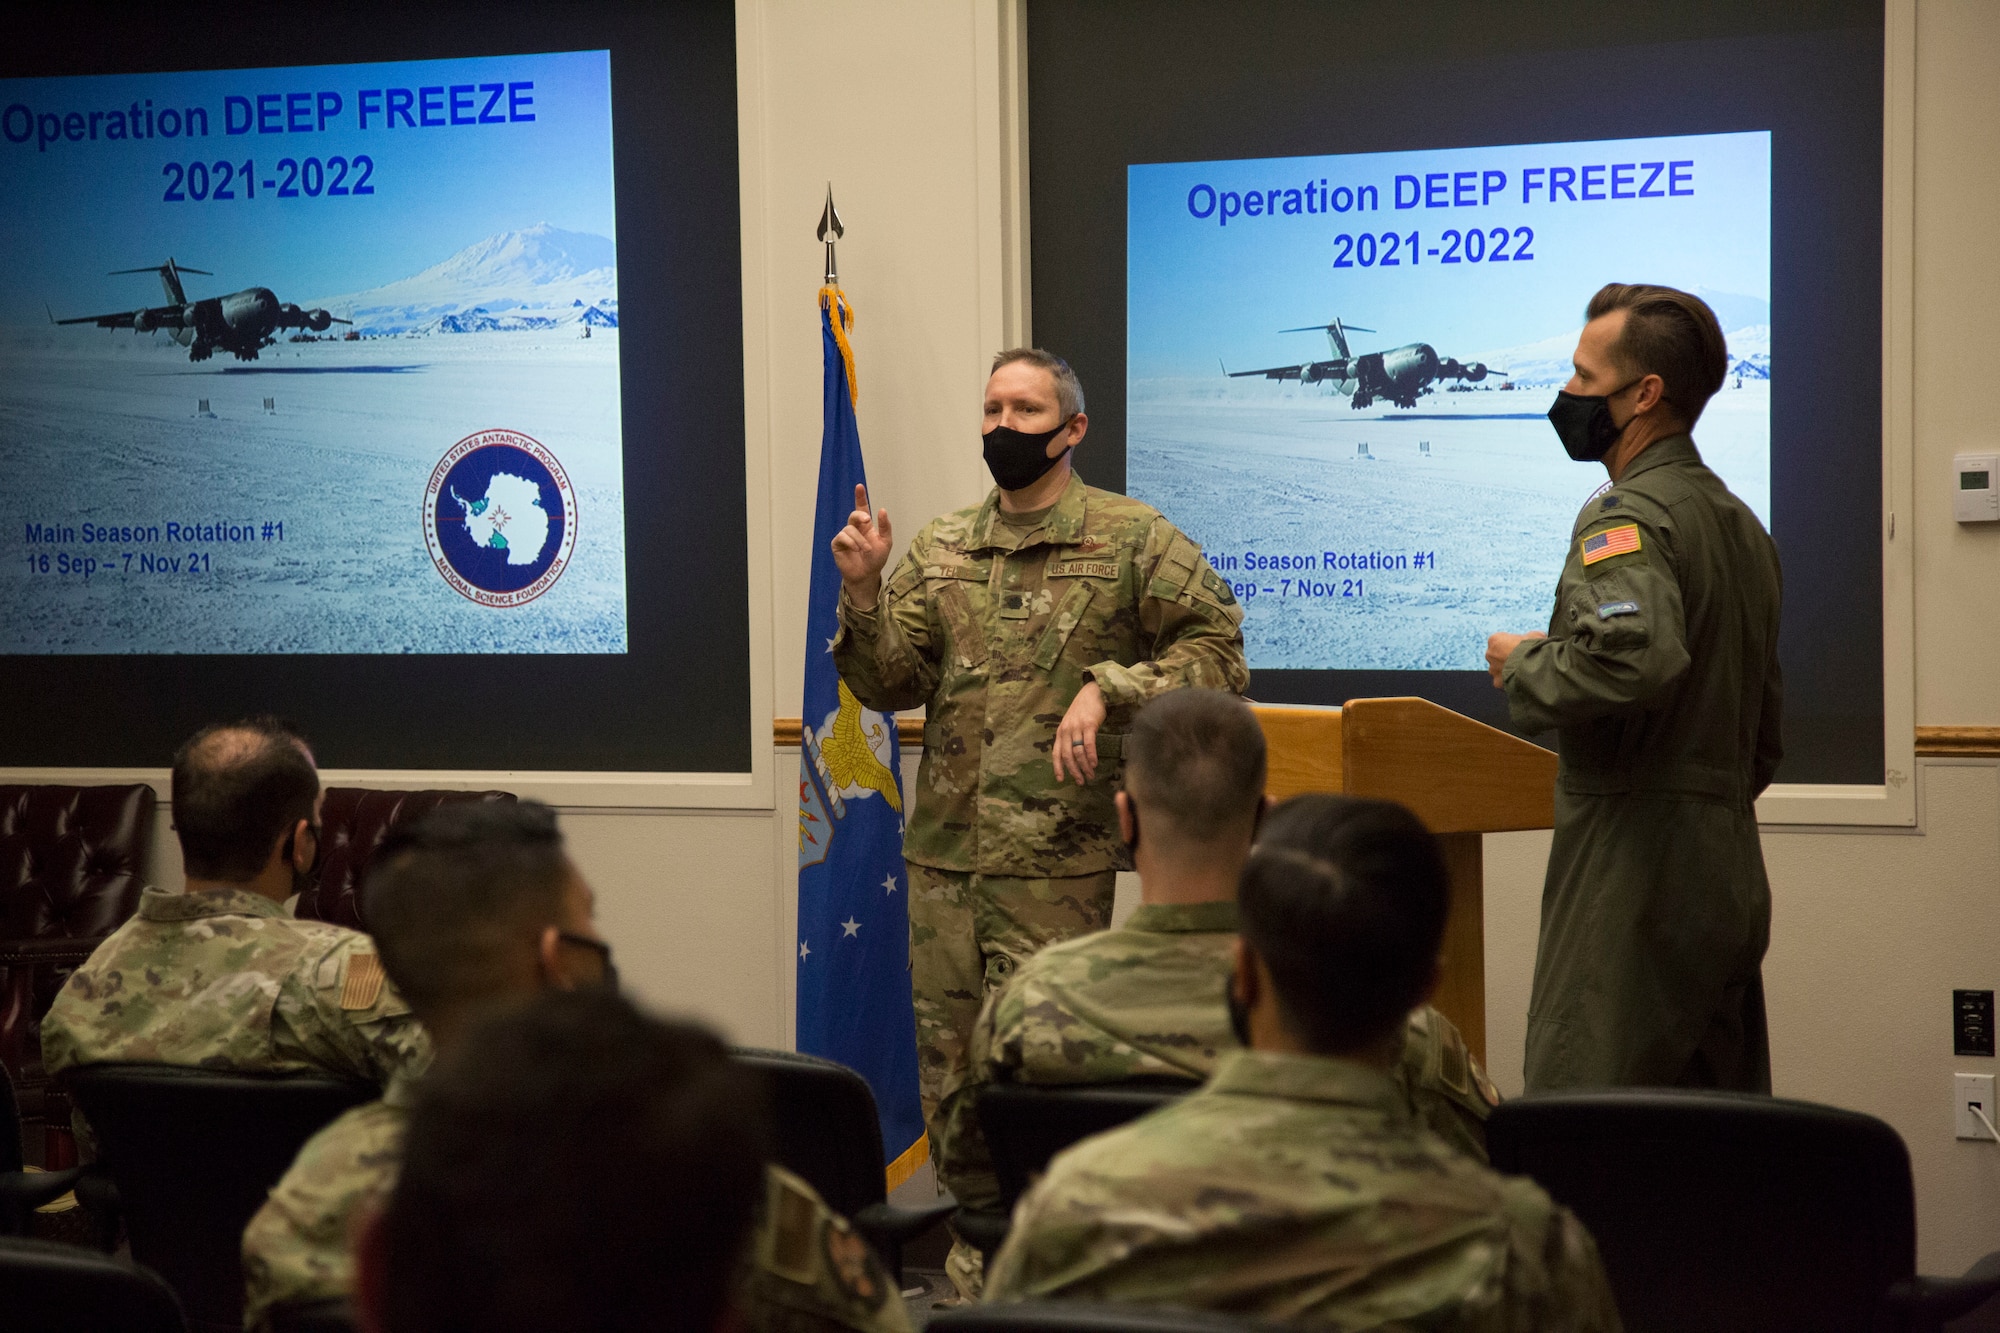 Two airmen at a podium briefing in front of a screen in an auditorium